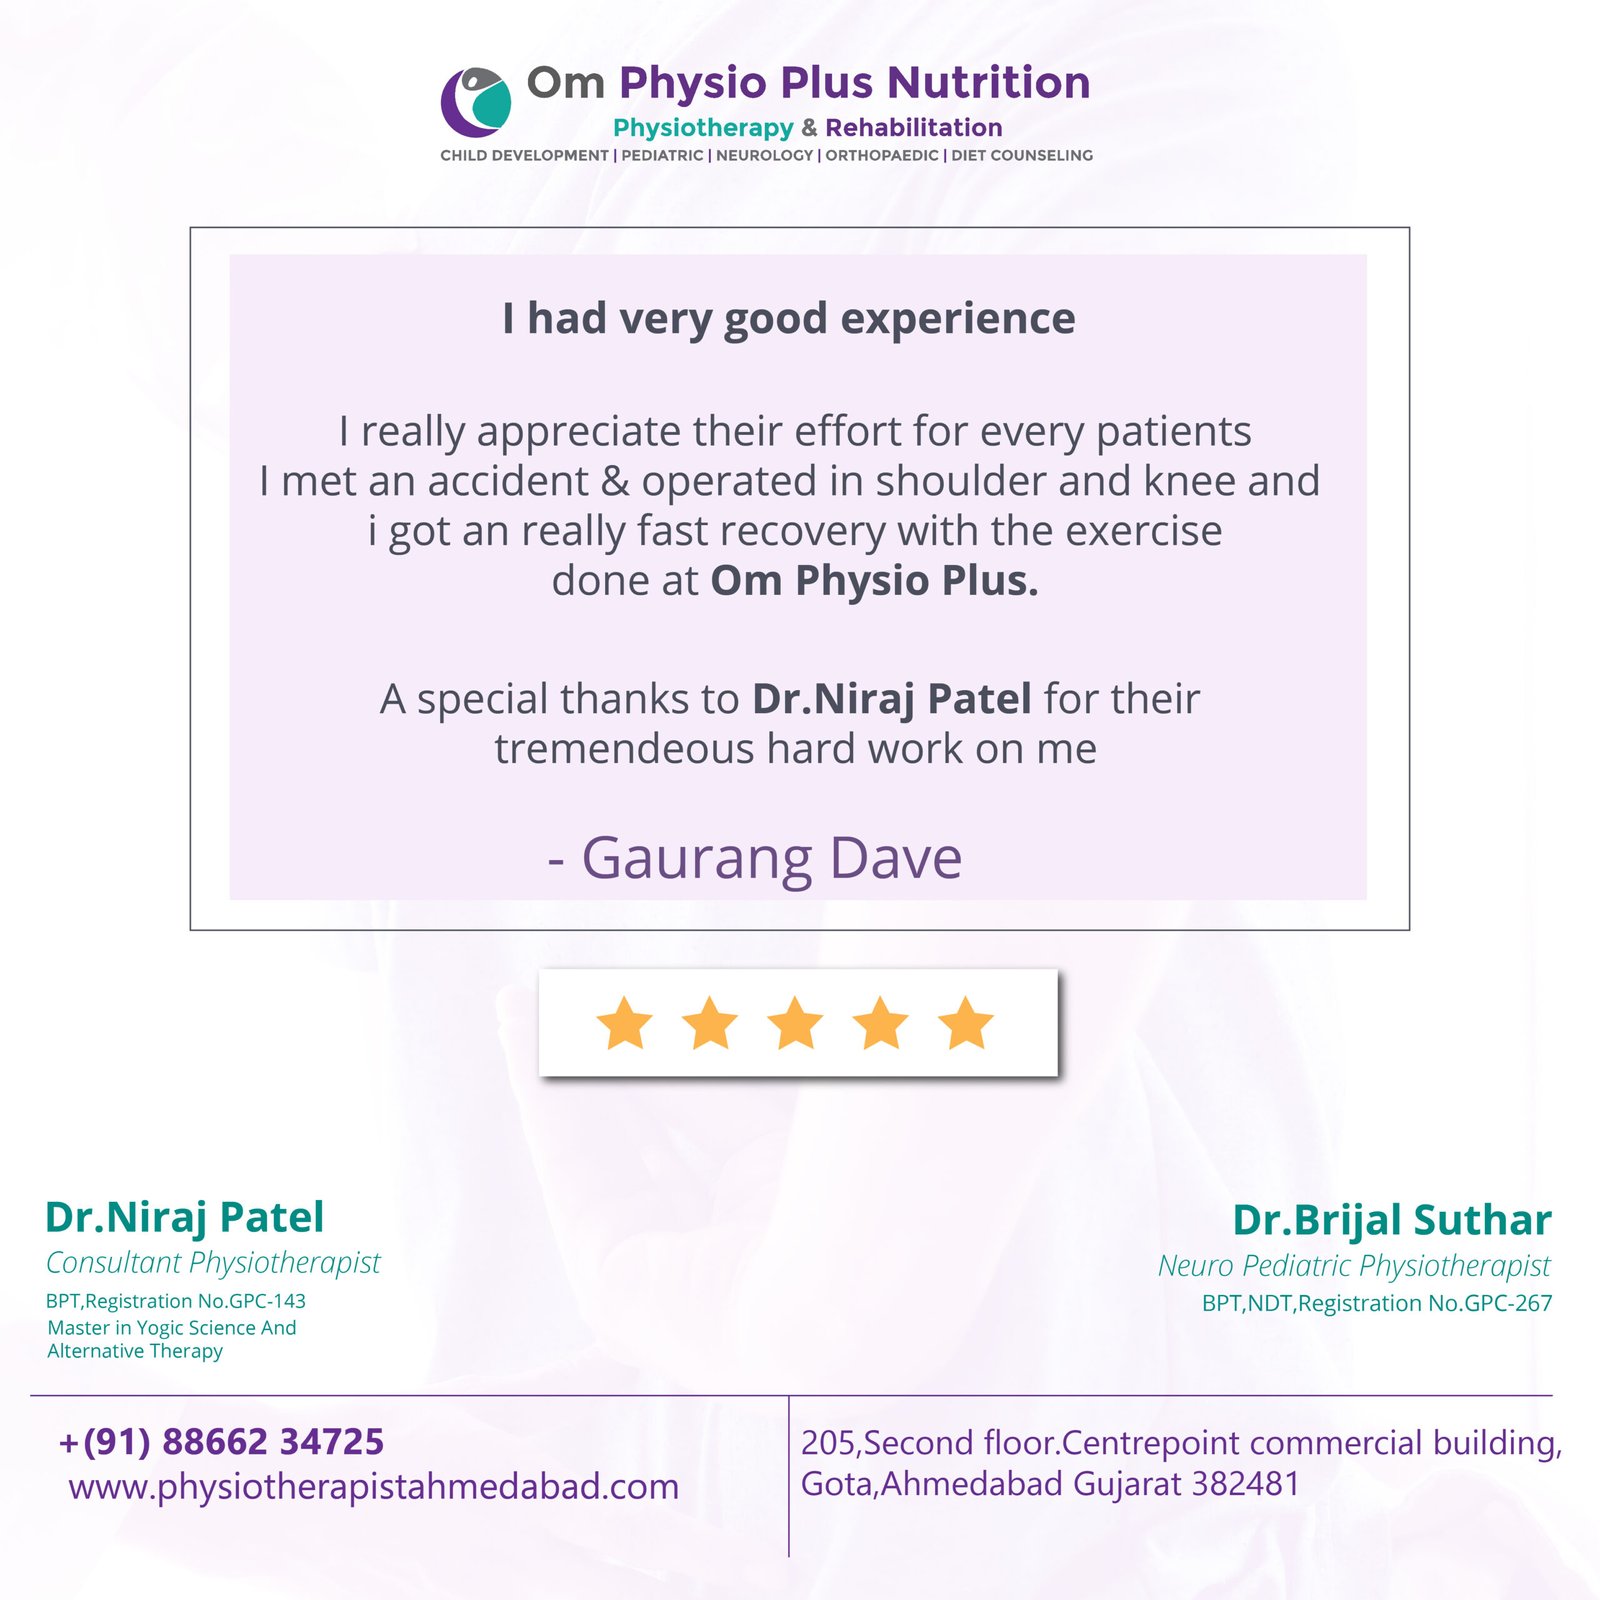 Review by Gaurang Dave